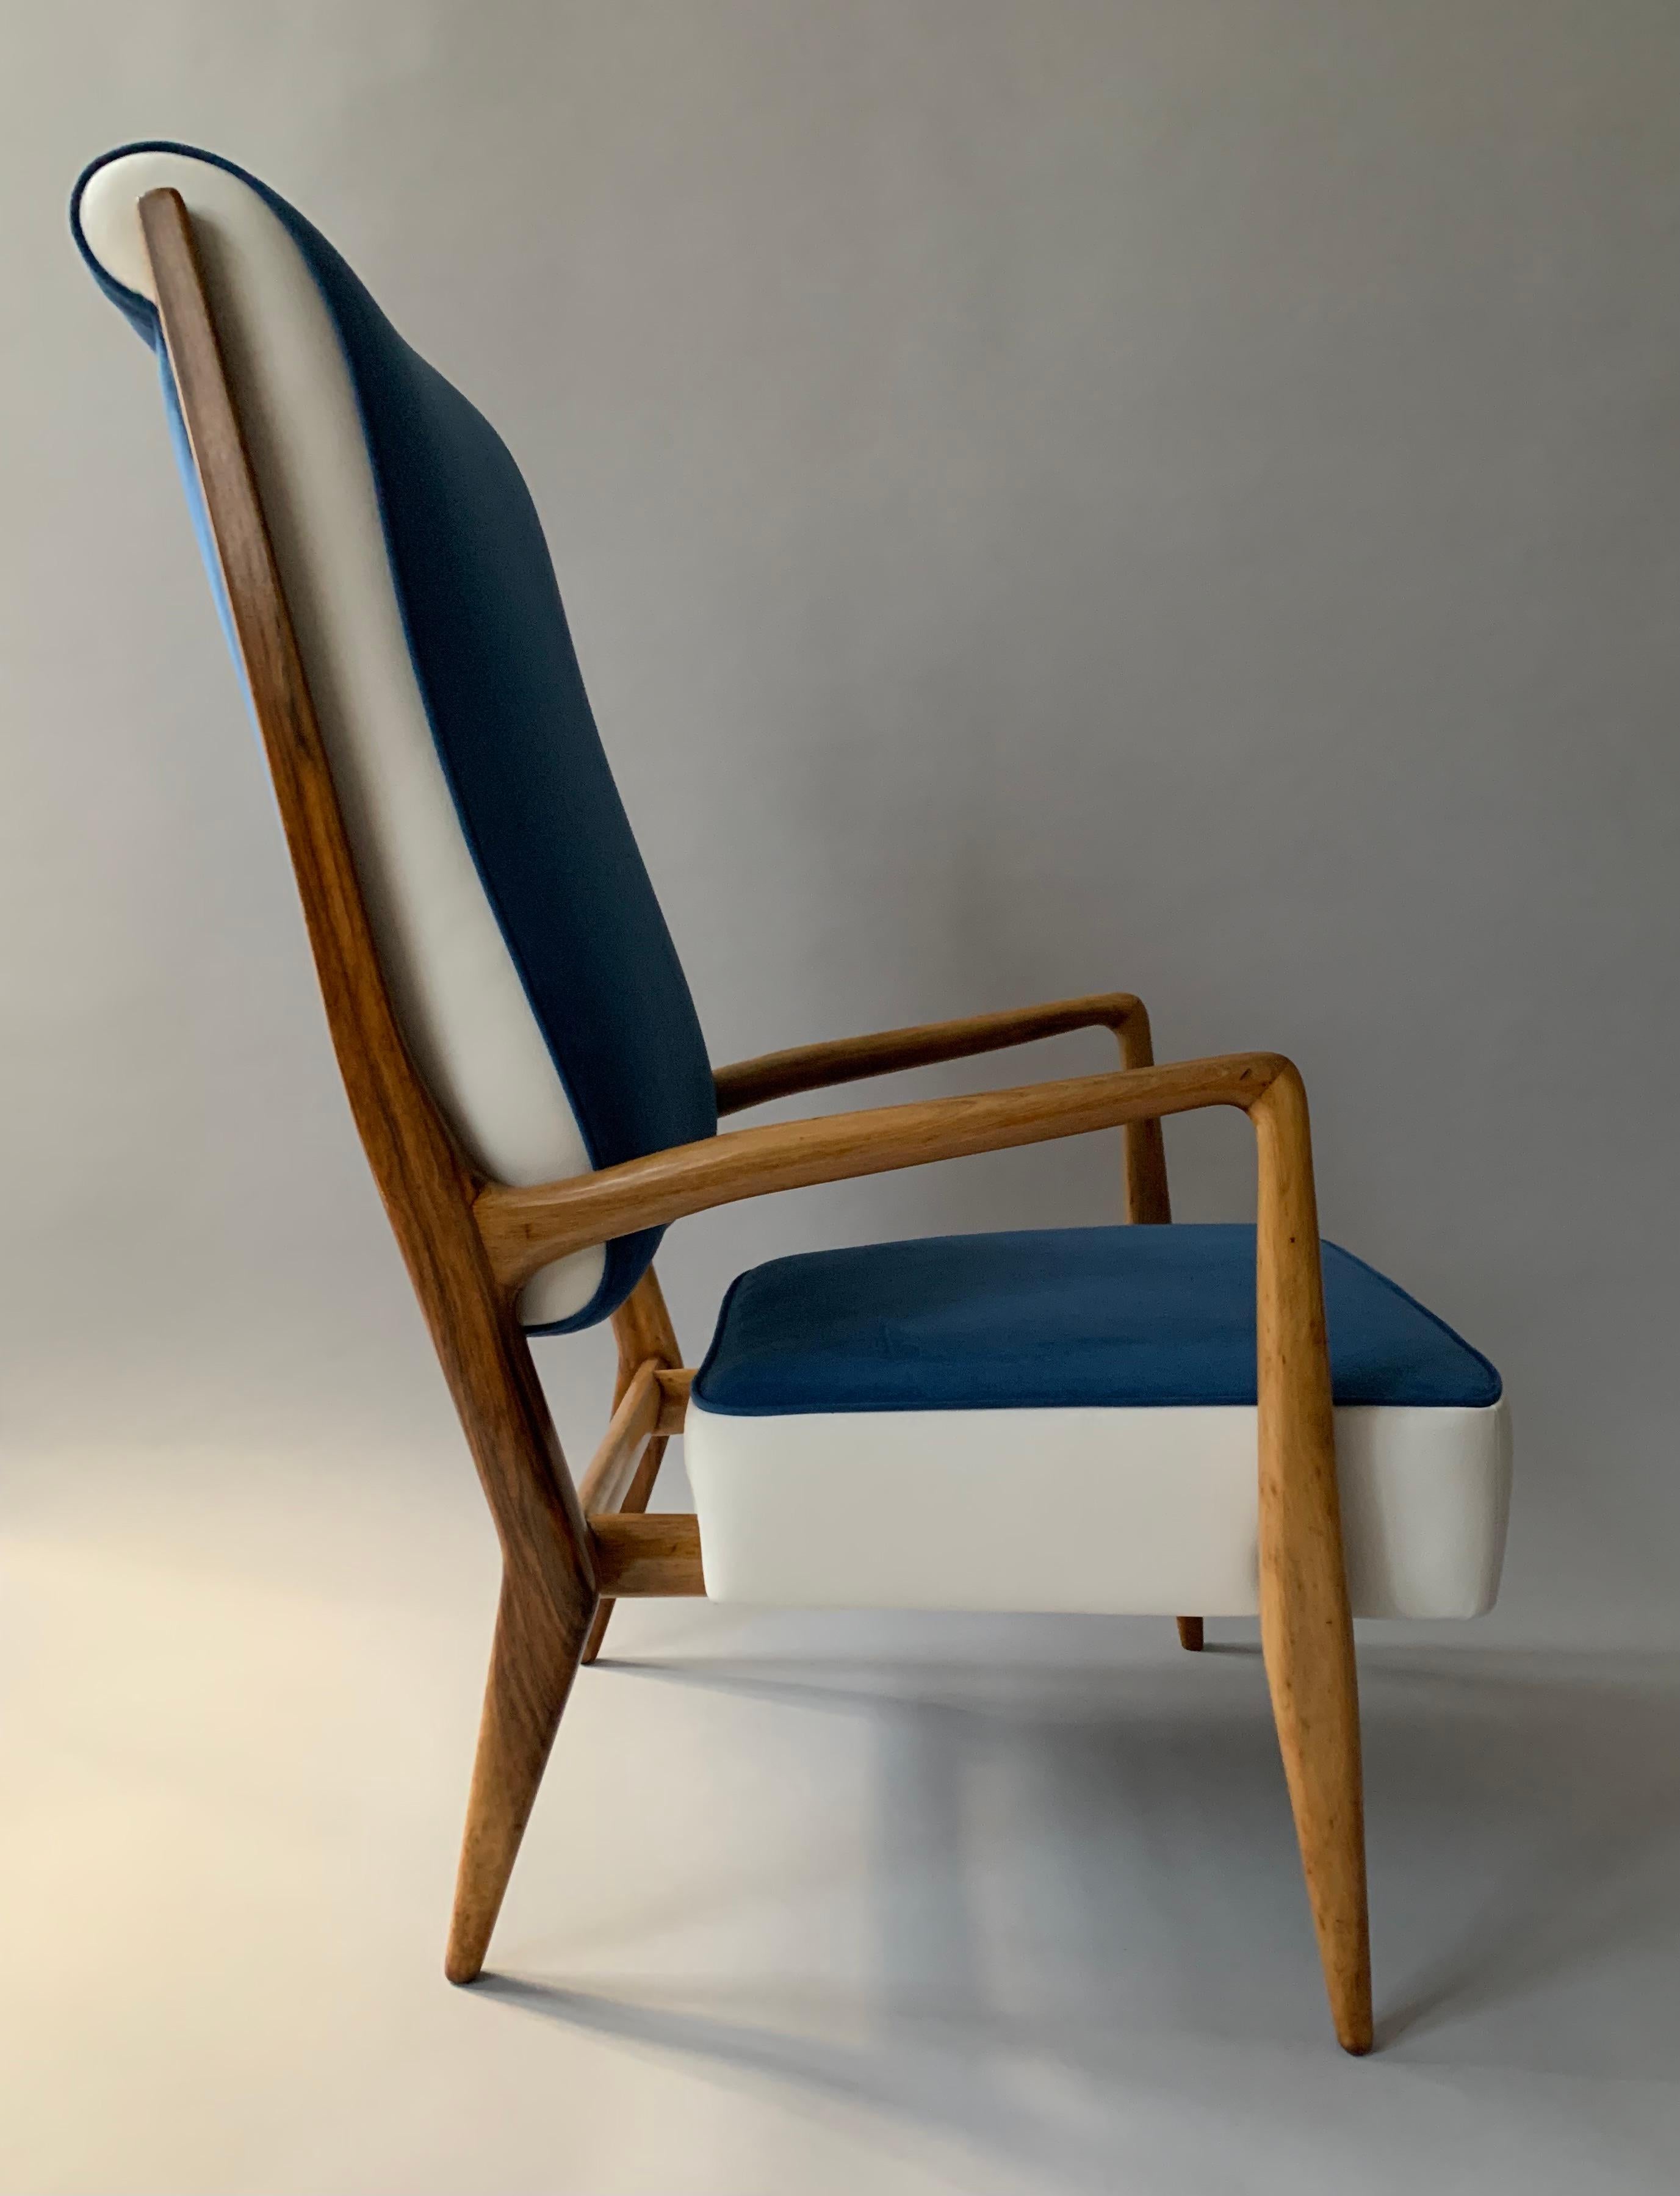 Mid-Century Modern Rare Gio Ponti Amchair Manufactured by Cassina Model # 589, Made in 1955